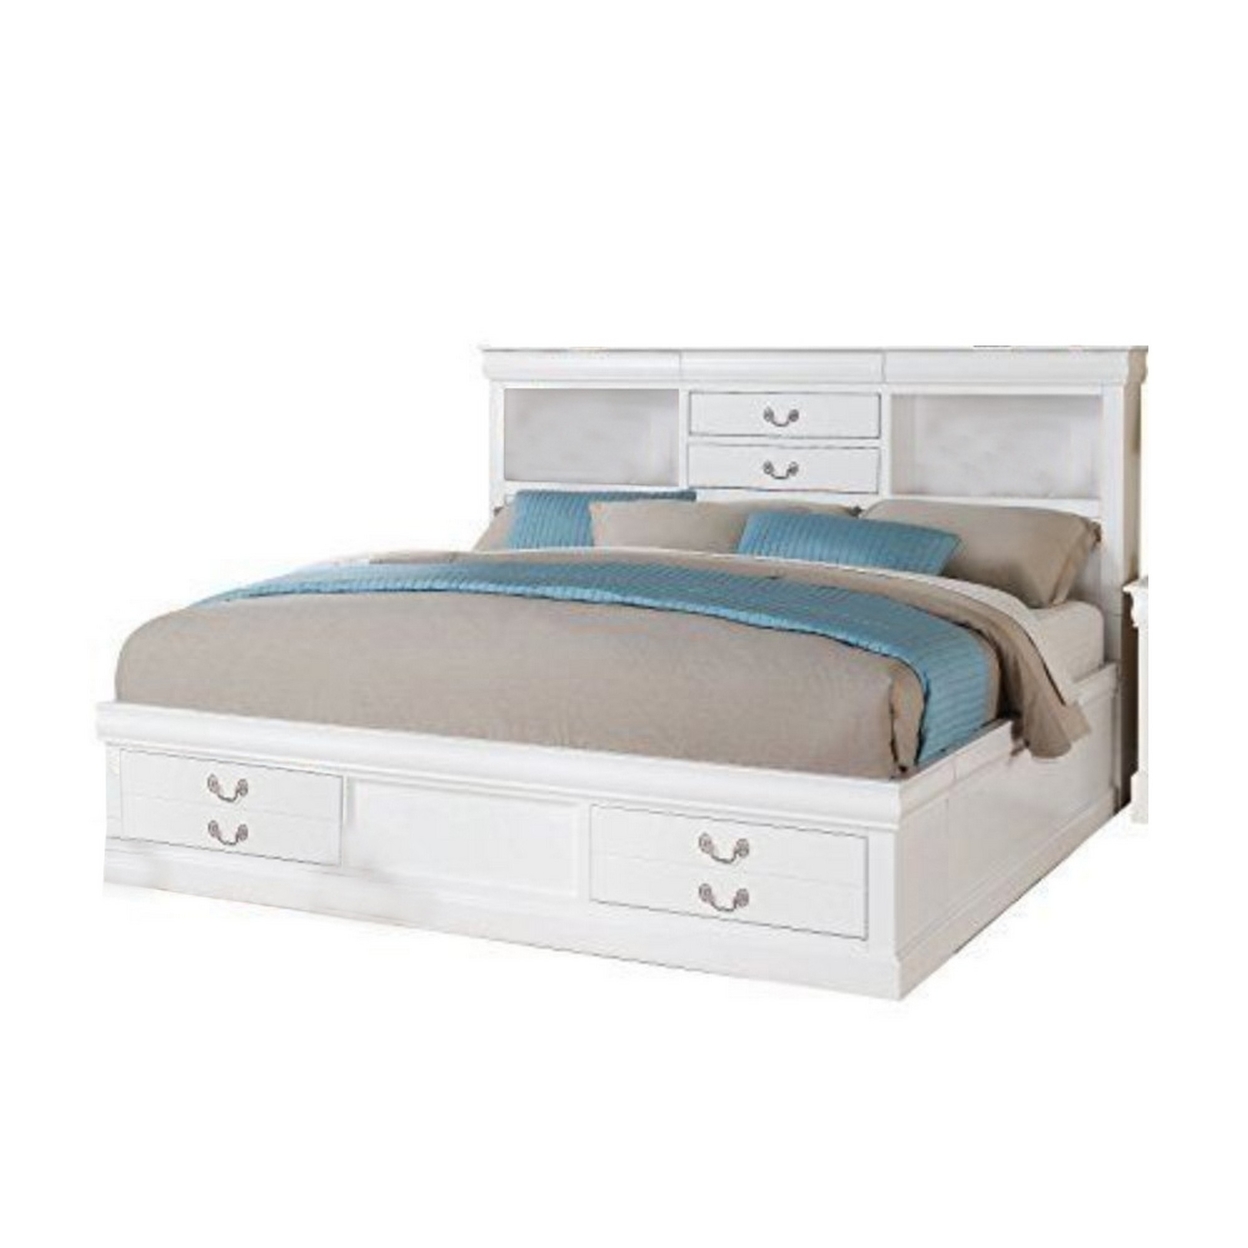 Luxurious And Stylish Queen Size Bed With Storage, White- Saltoro Sherpi